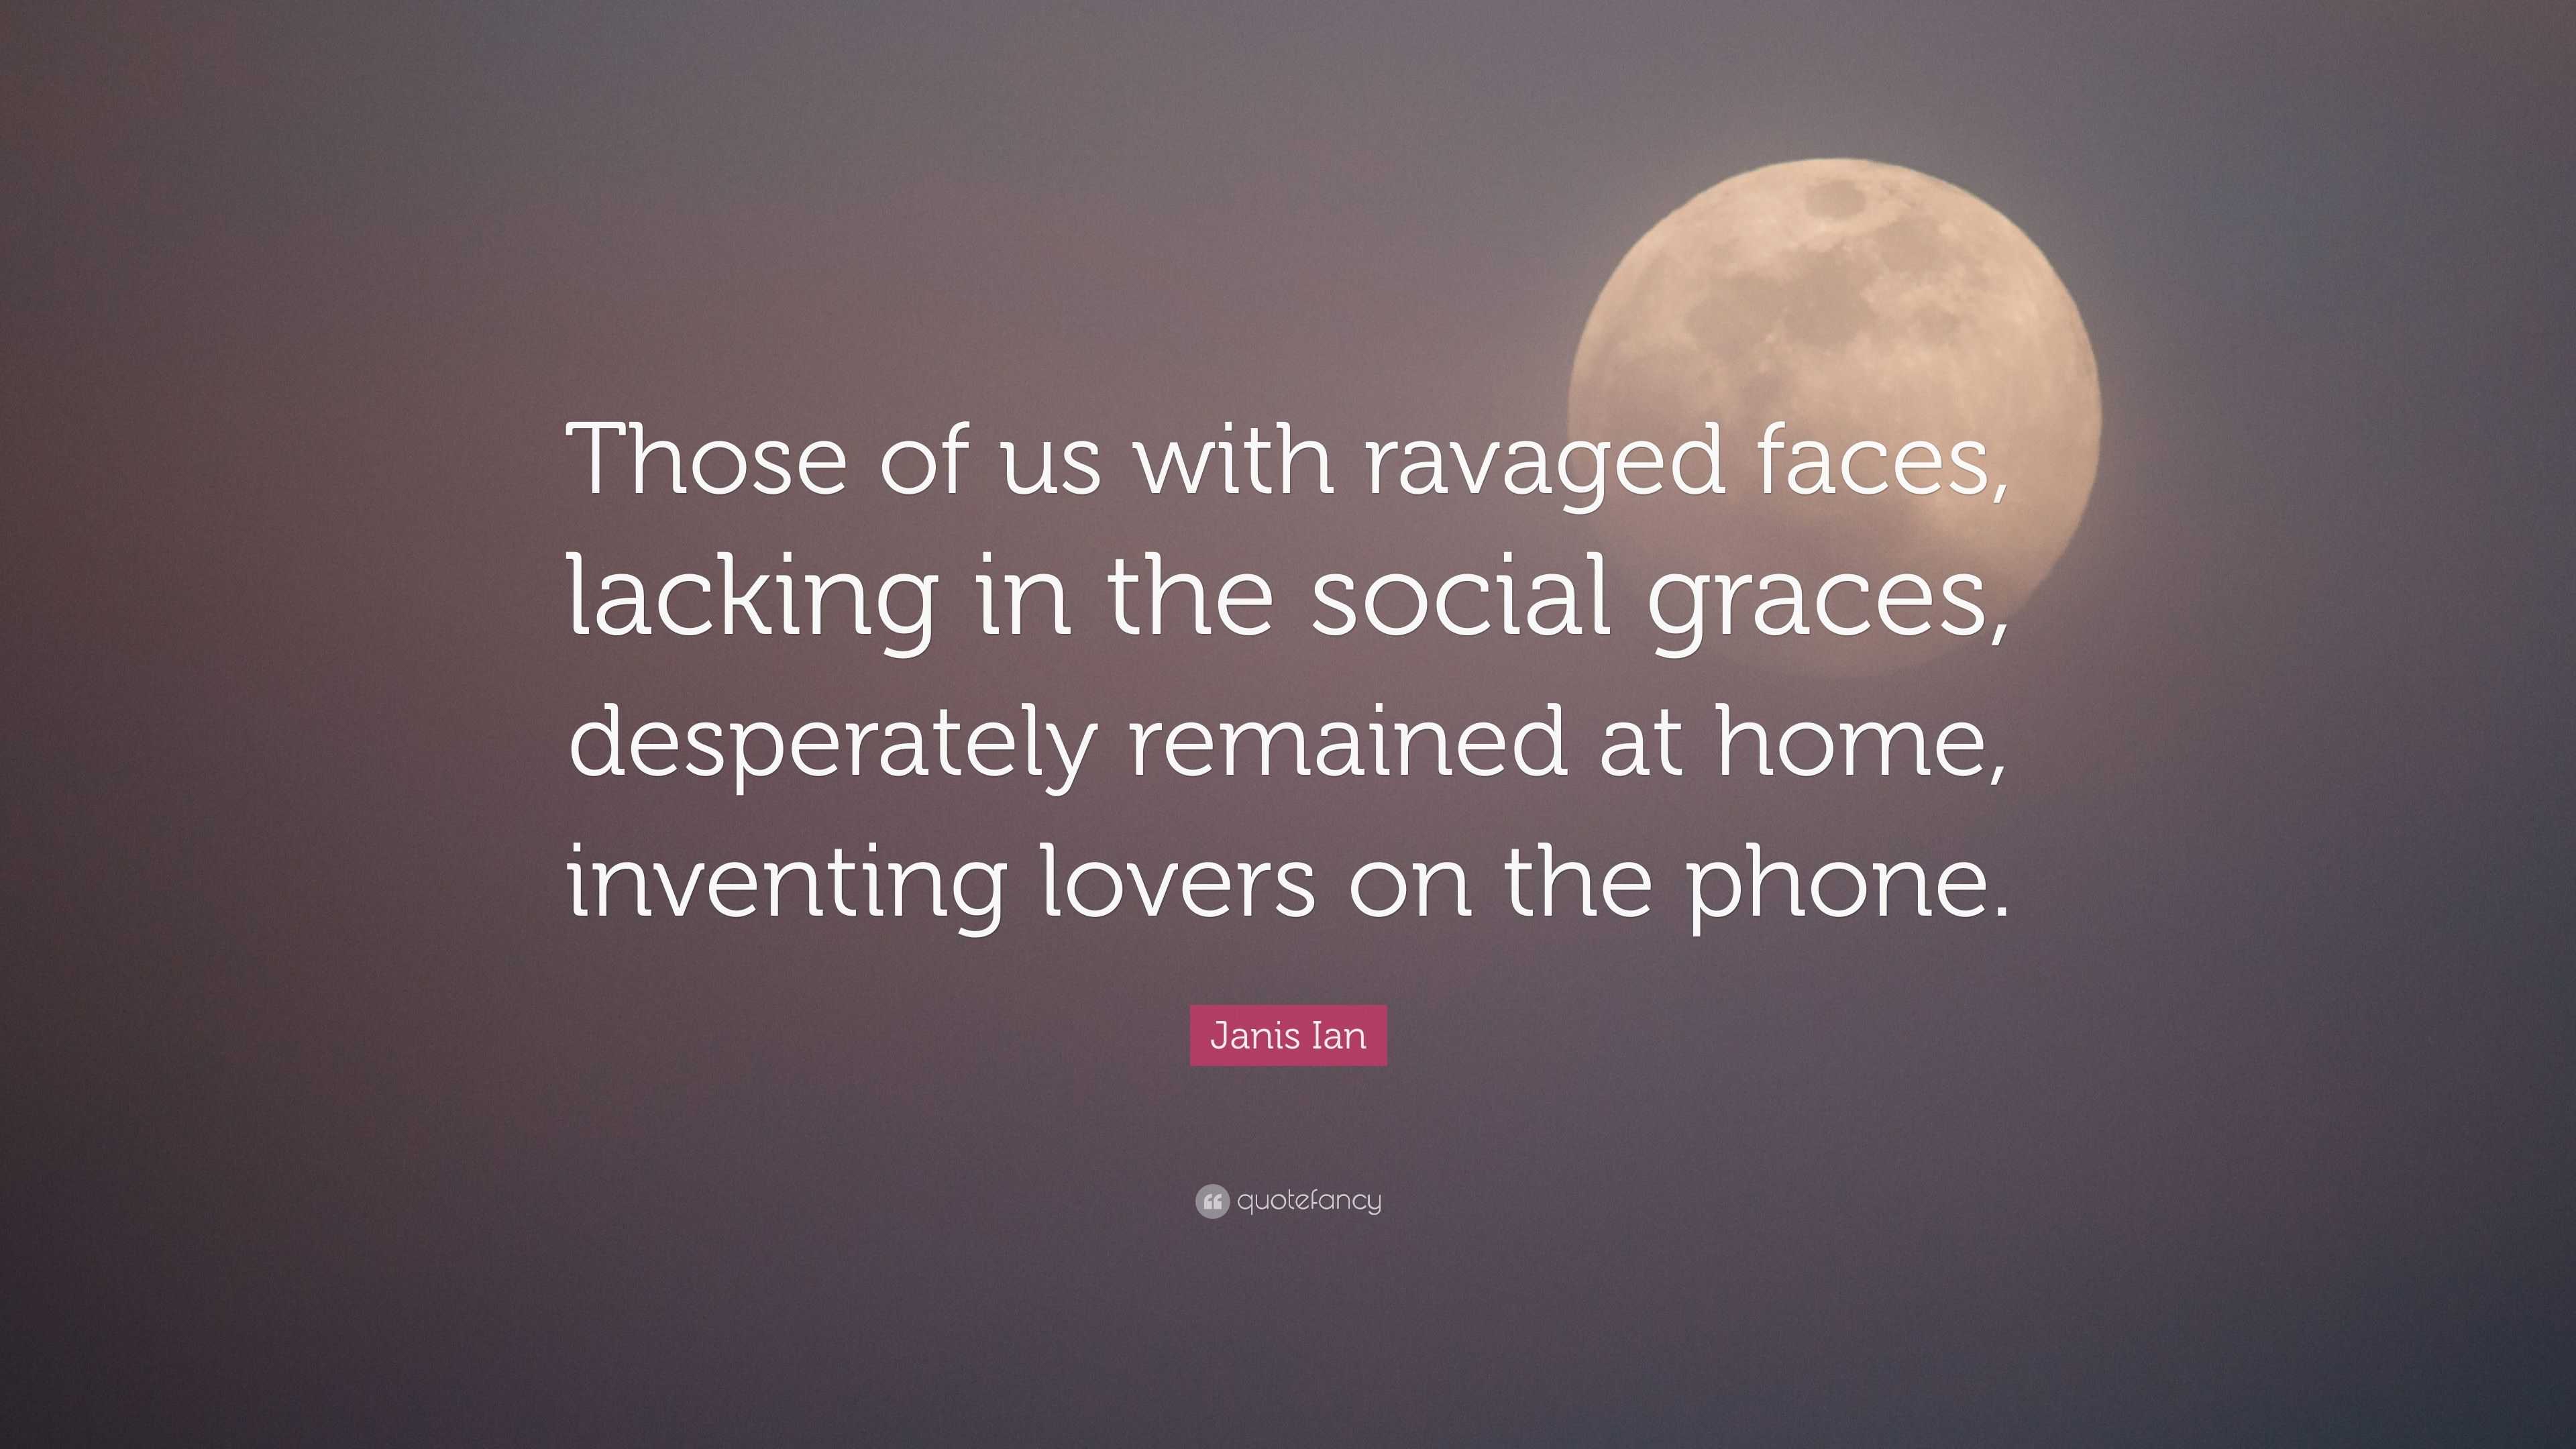 Janis Ian Quote: Those of us with ravaged faces lacking in the social